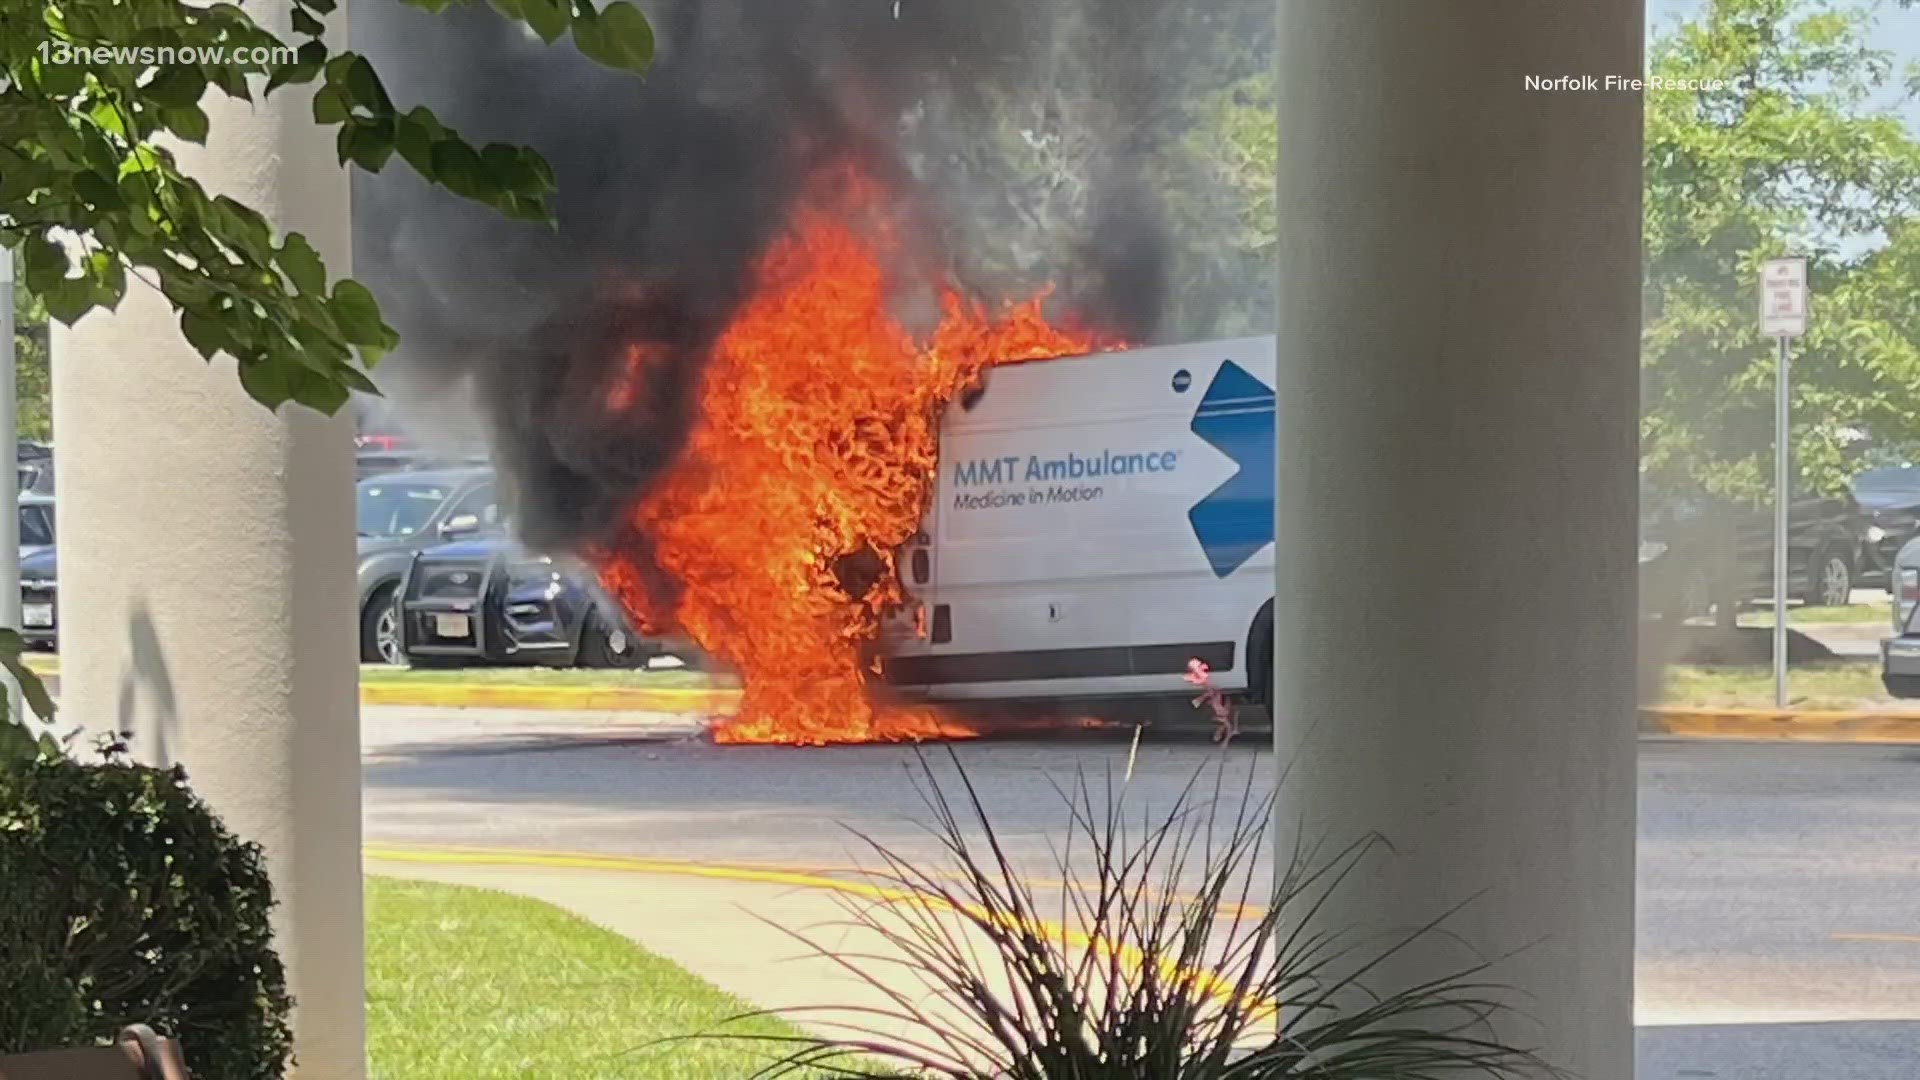 Photos provided by the fire department show the ambulance's engine compartment completely engulfed in flames.